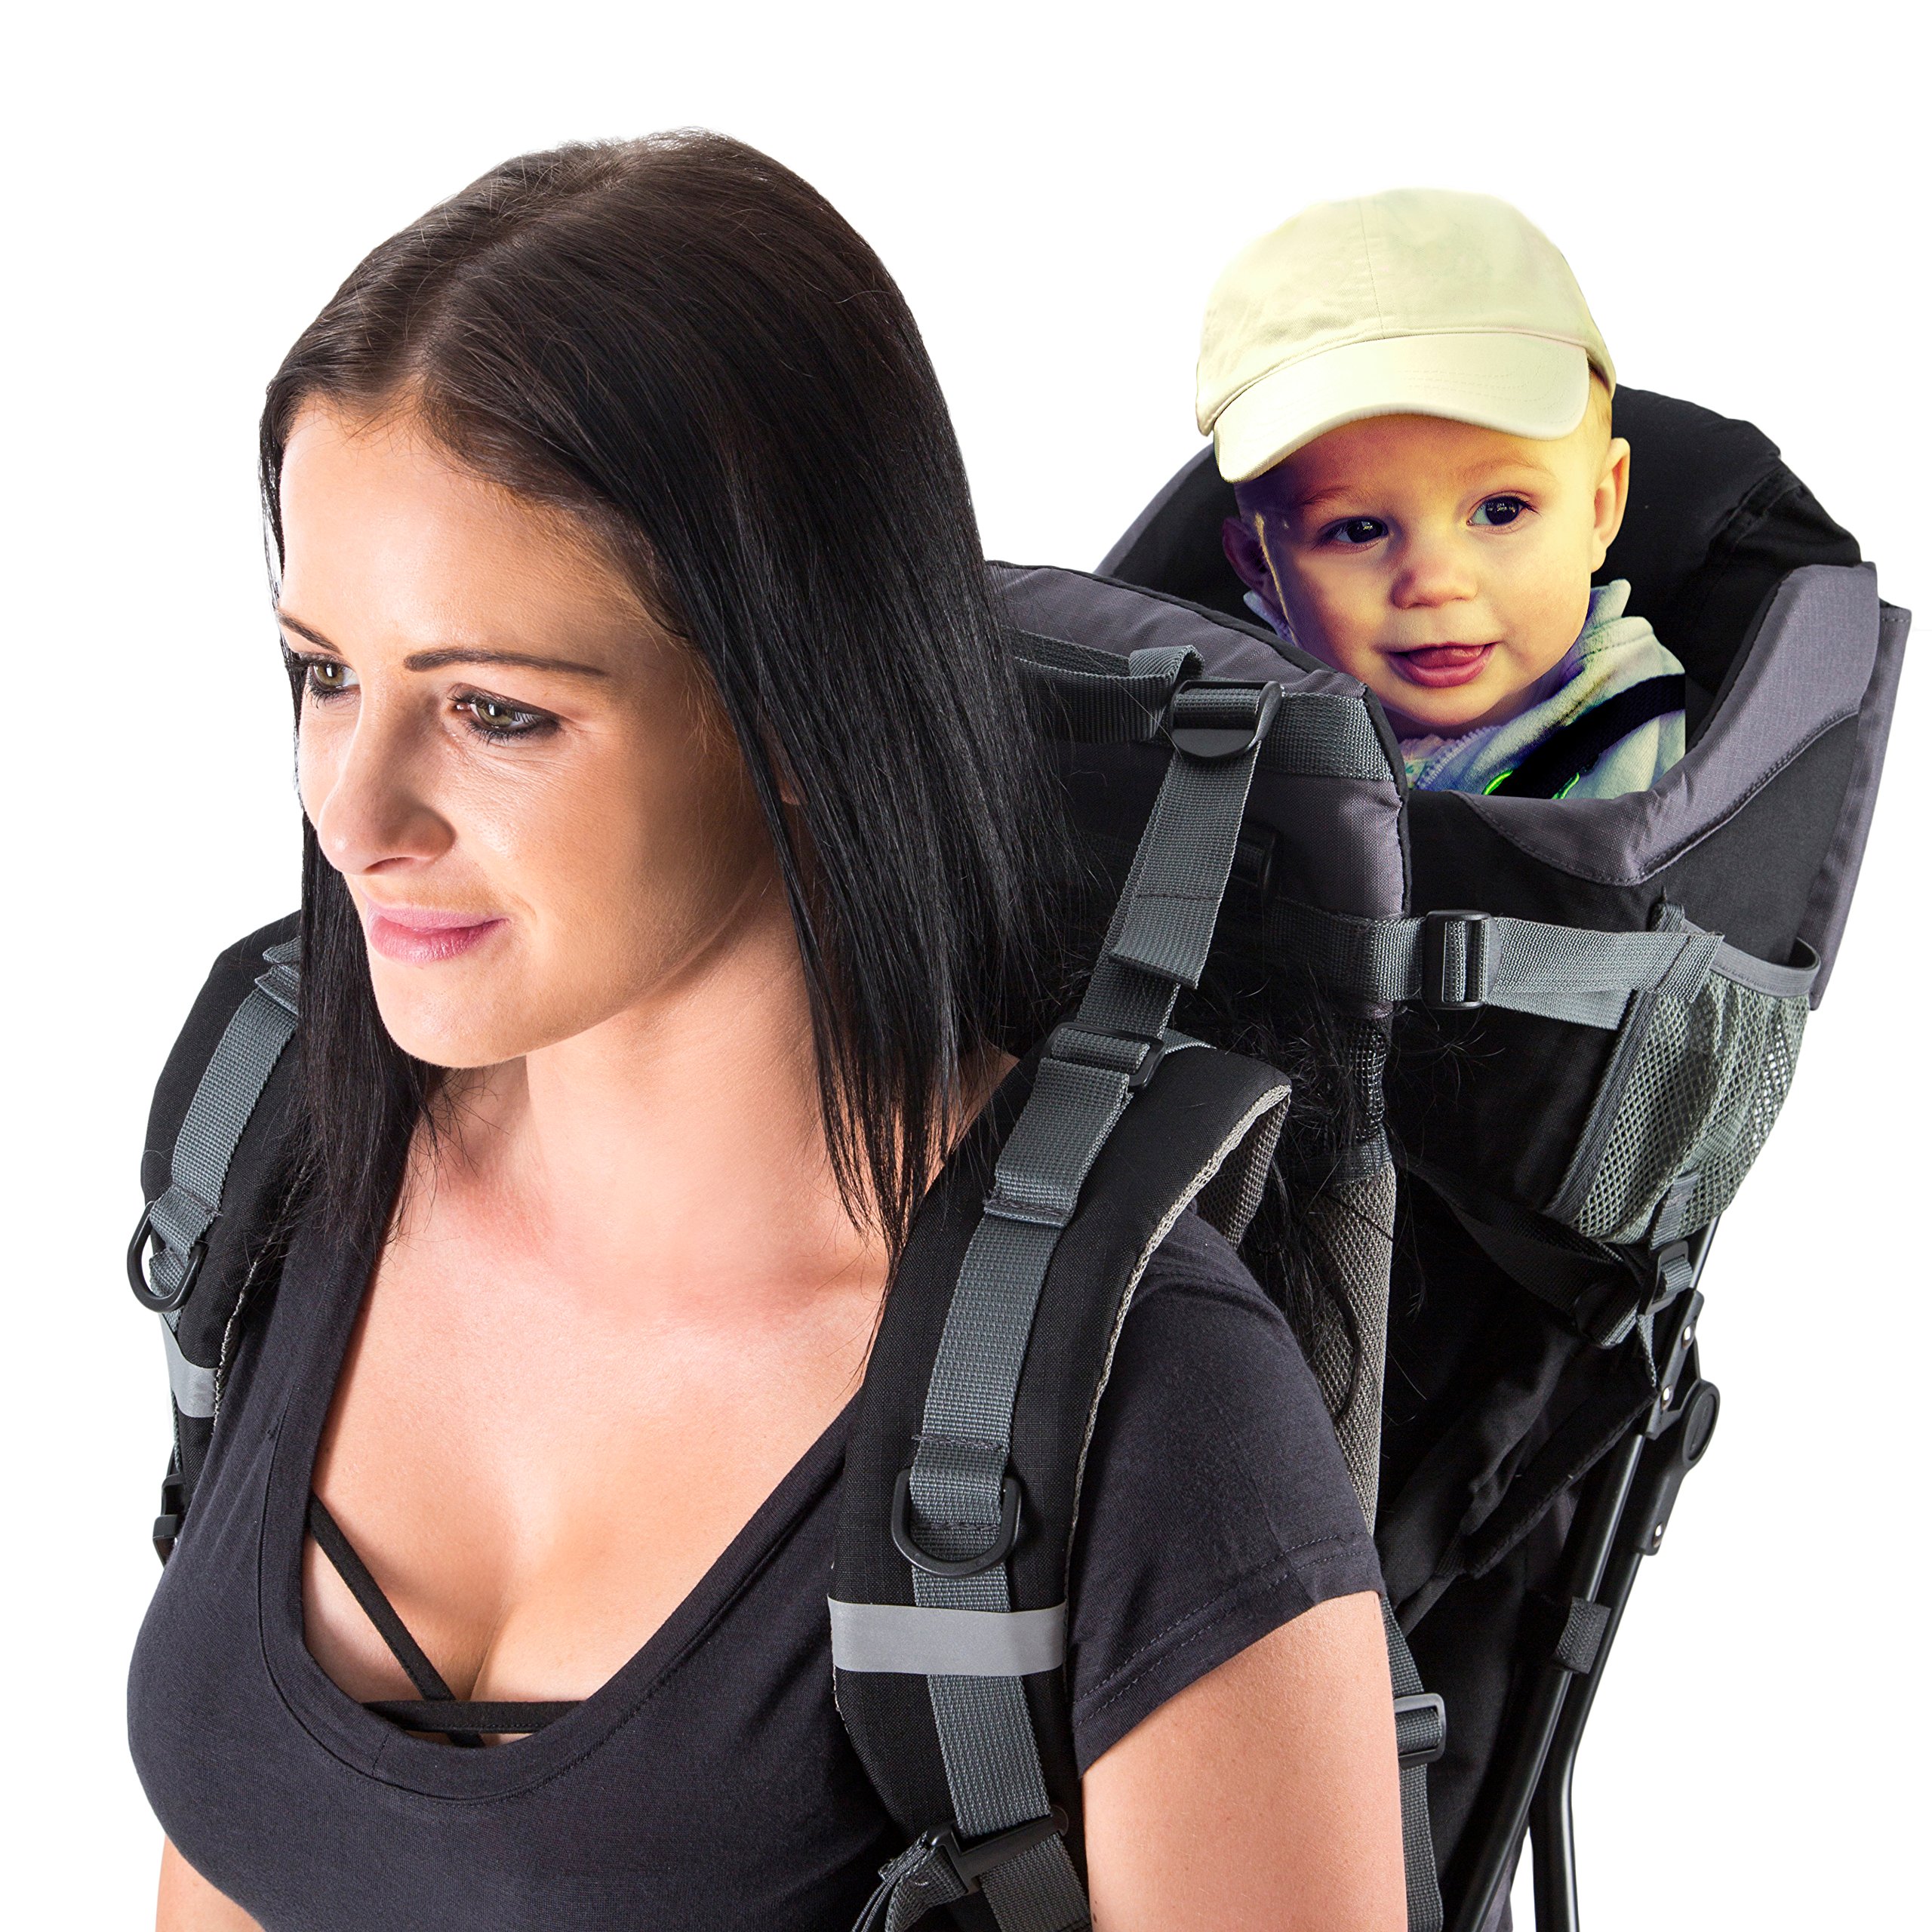 Luvdbaby Premium Baby Backpack Carrier for Hiking - Baby Carrier Backpack for Toddlers - Ergonomic Hiking Child Carrier Backpack